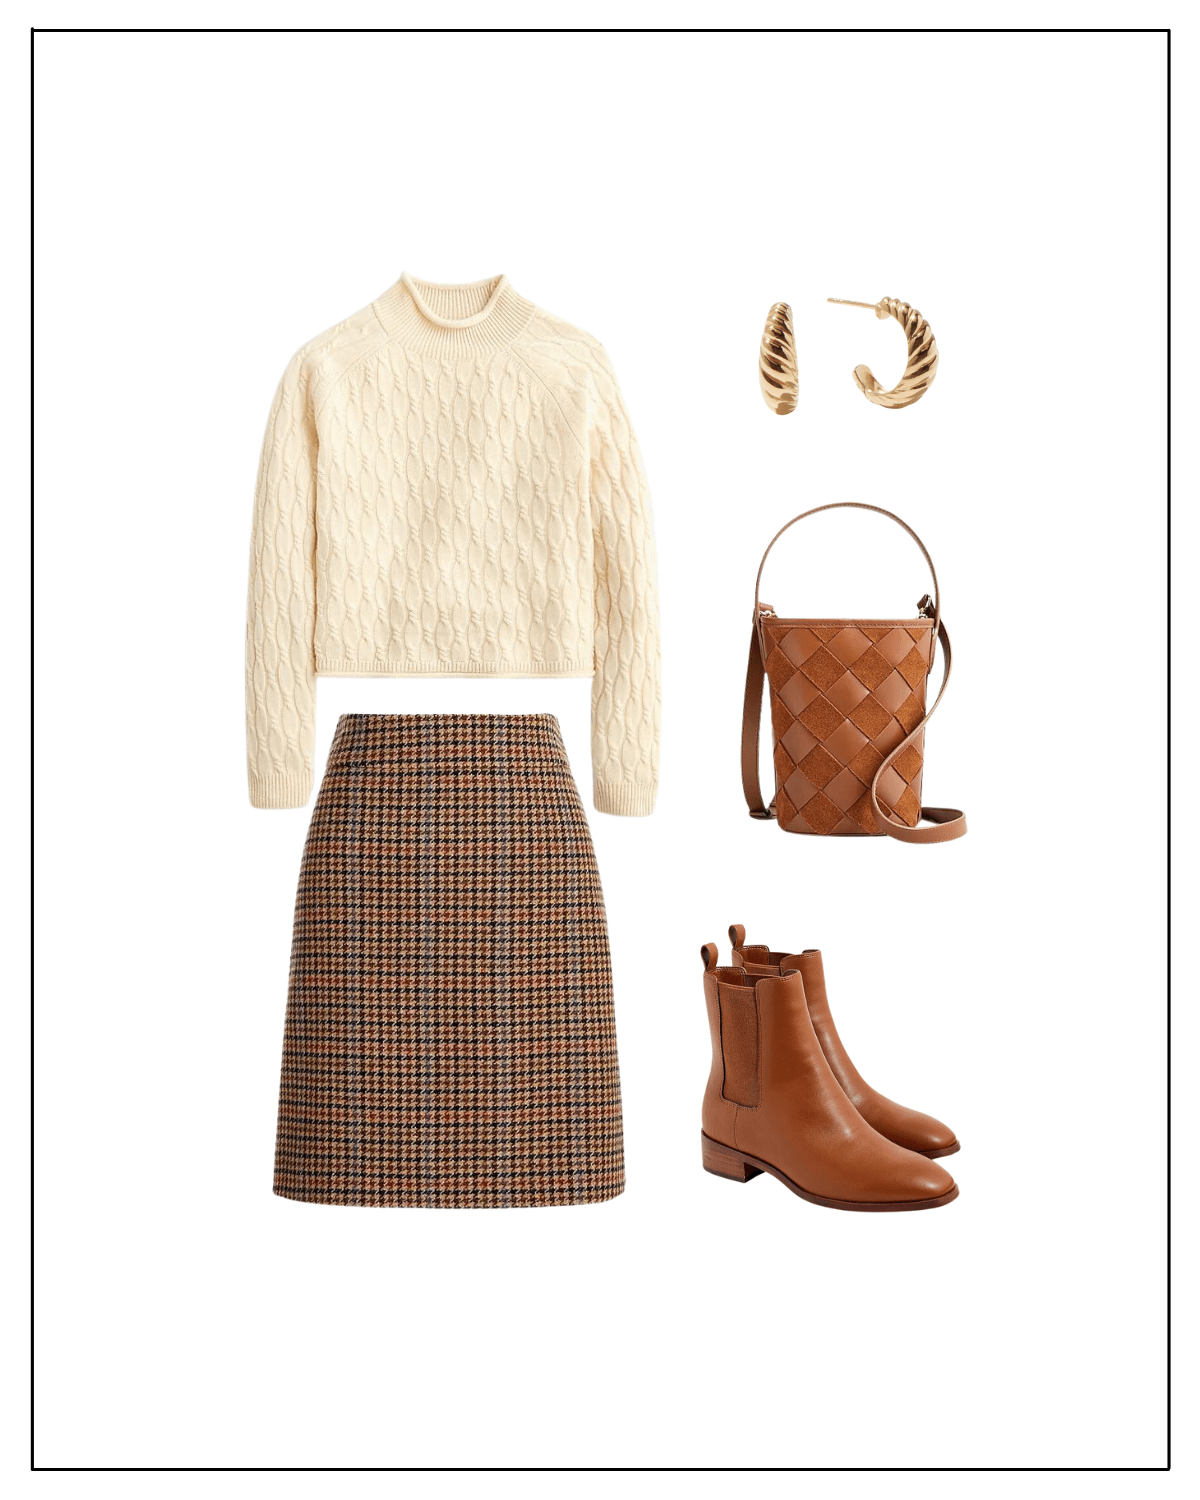 Skirts are another great transitional wardrobe staple for fall. For this outfit I styled a brown houndstooth skirt with a cream rollback cable-knit sweater. For shoes, I paired it with brown leather Chelsea boots. And to complete the outfit I accessorized with gold hoop earrings and a woven leather bucket bag. 